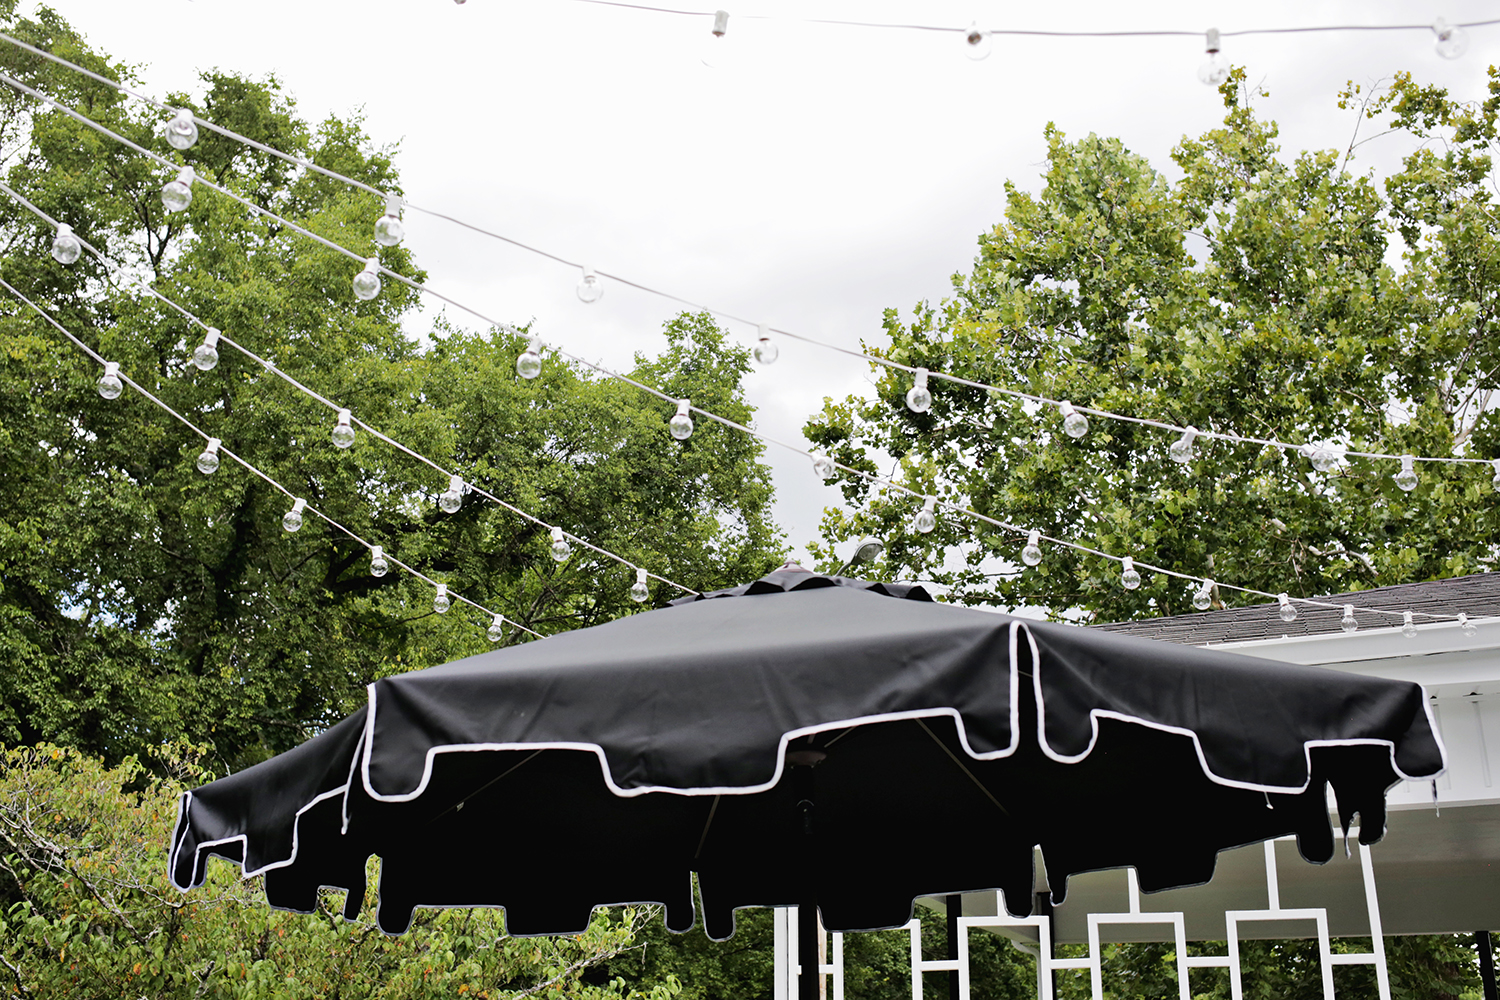 Create Outdoor Patio Lighting Without a Pergola (Renter Friendly!) Click through for tutorial. 